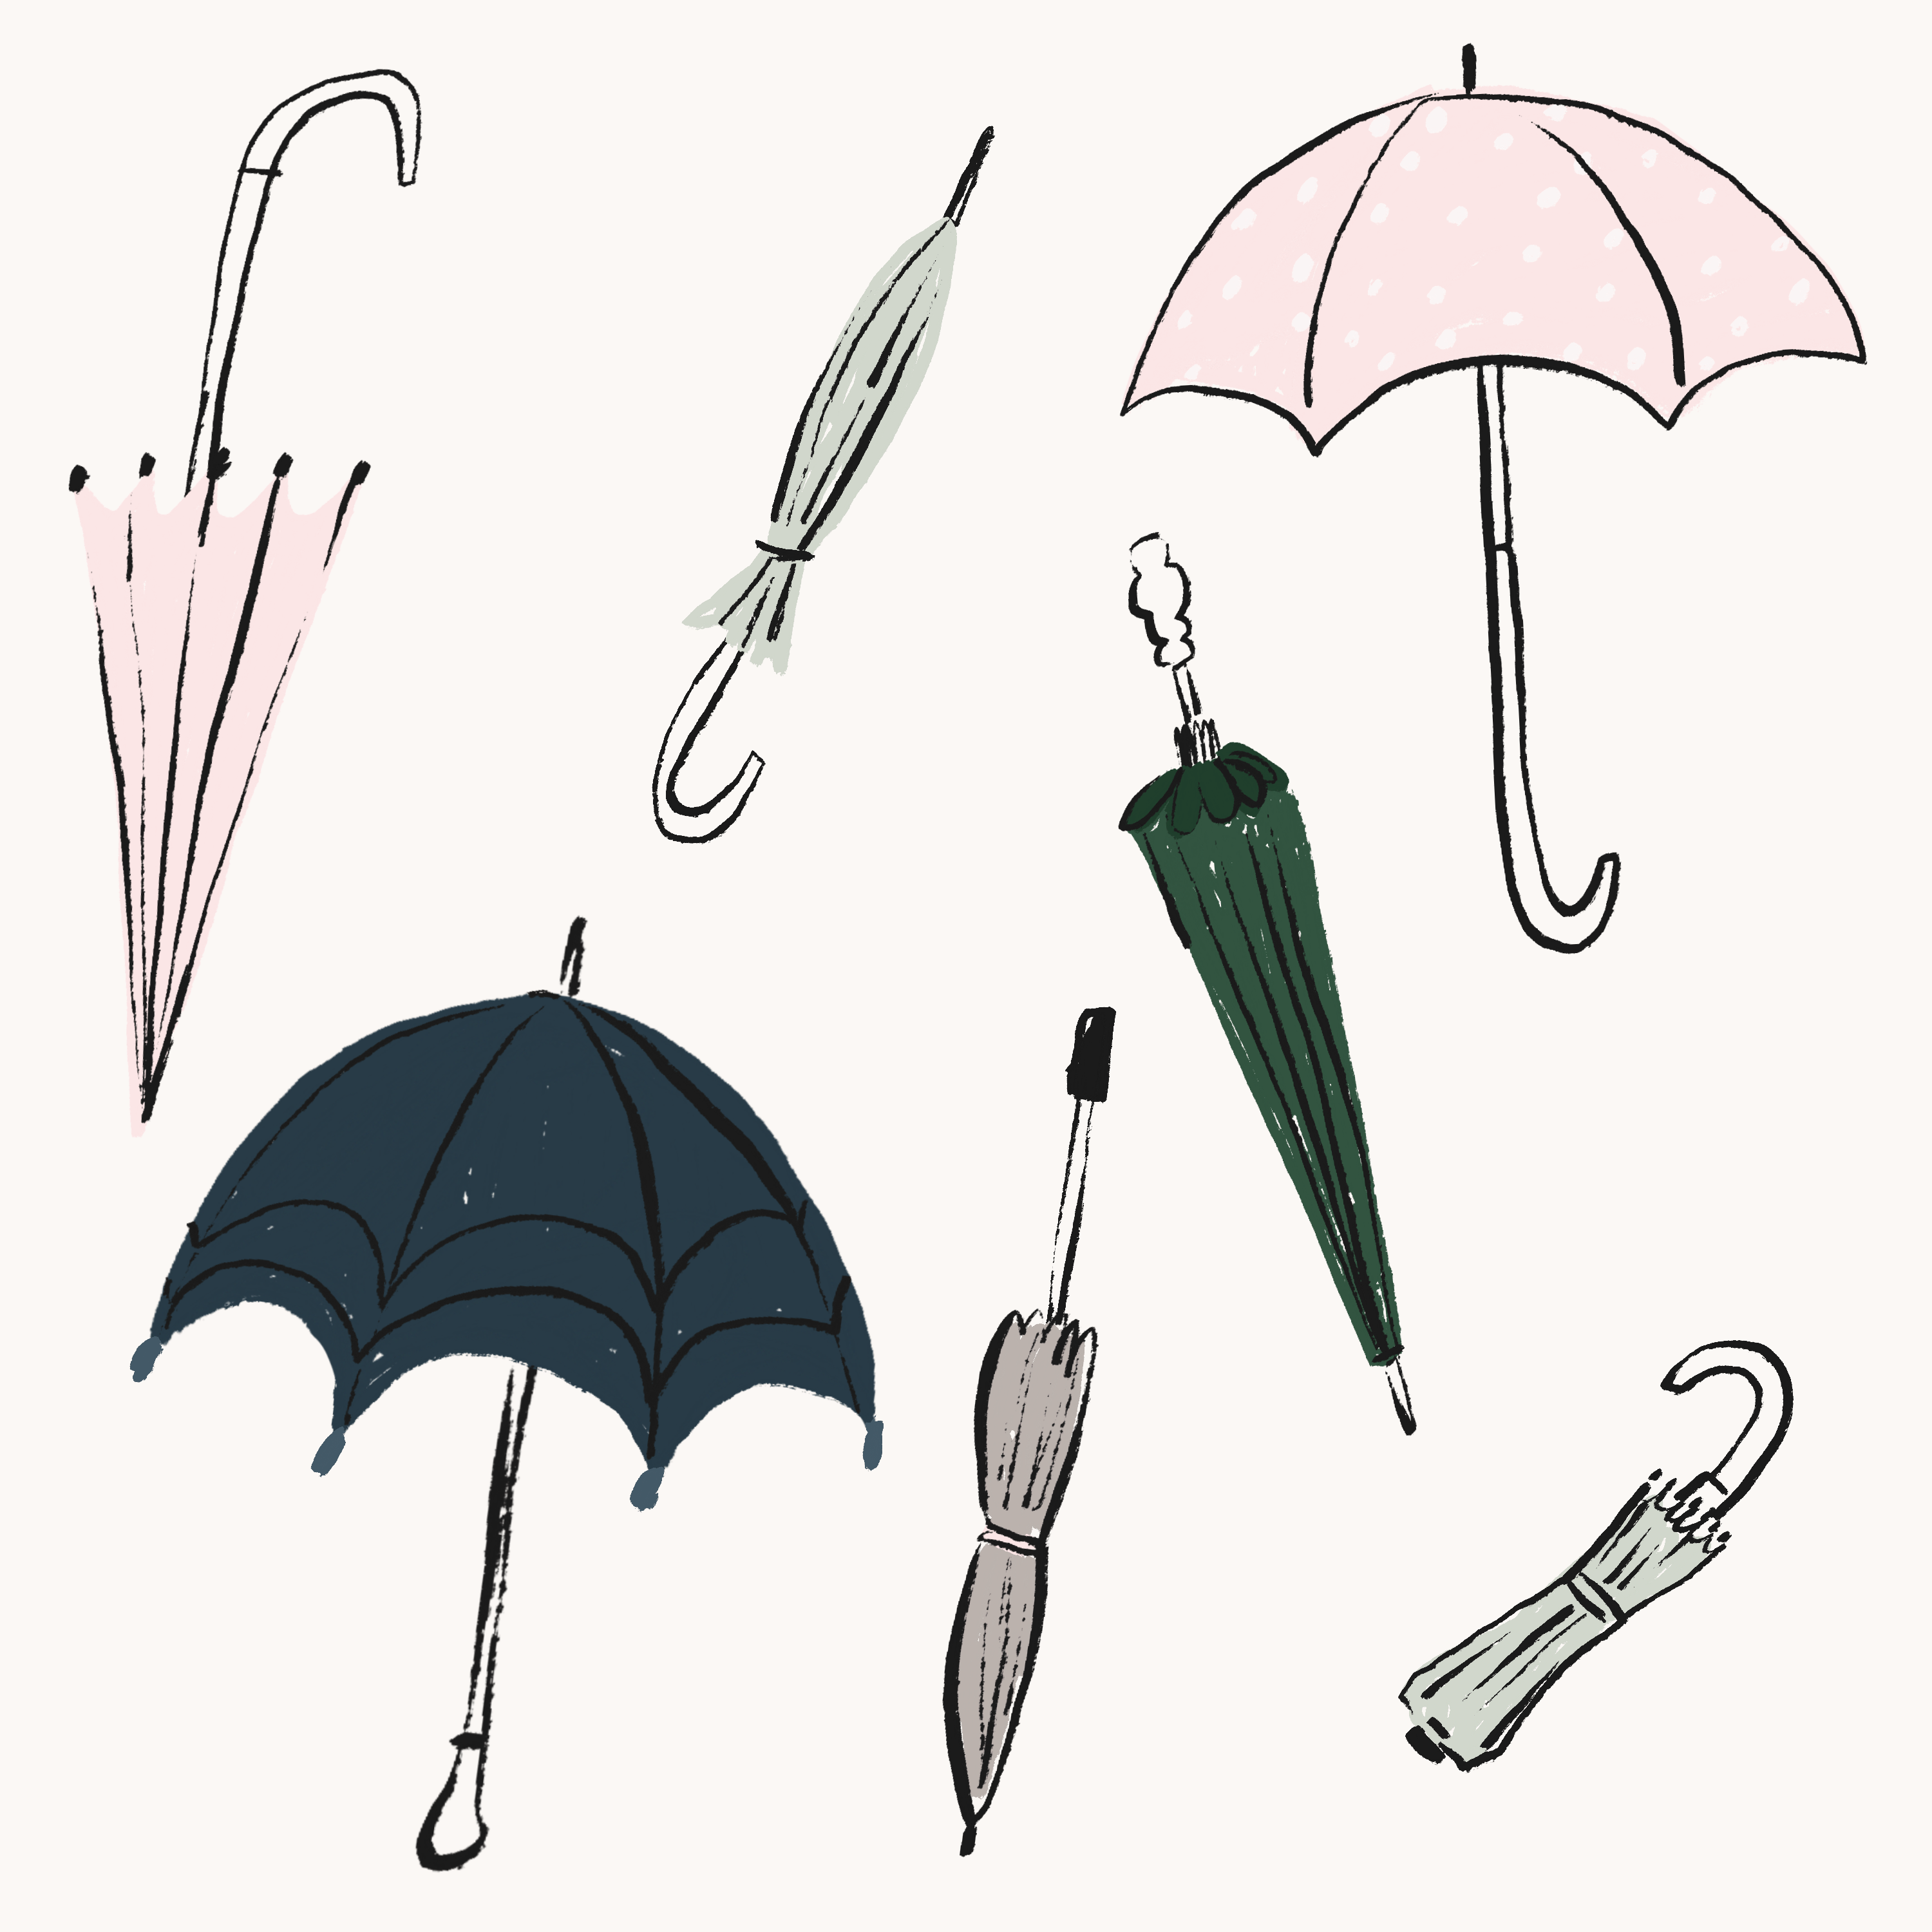 illustration of seven different umbrellas in variations of open and closed, in pink, green, gray, and blue